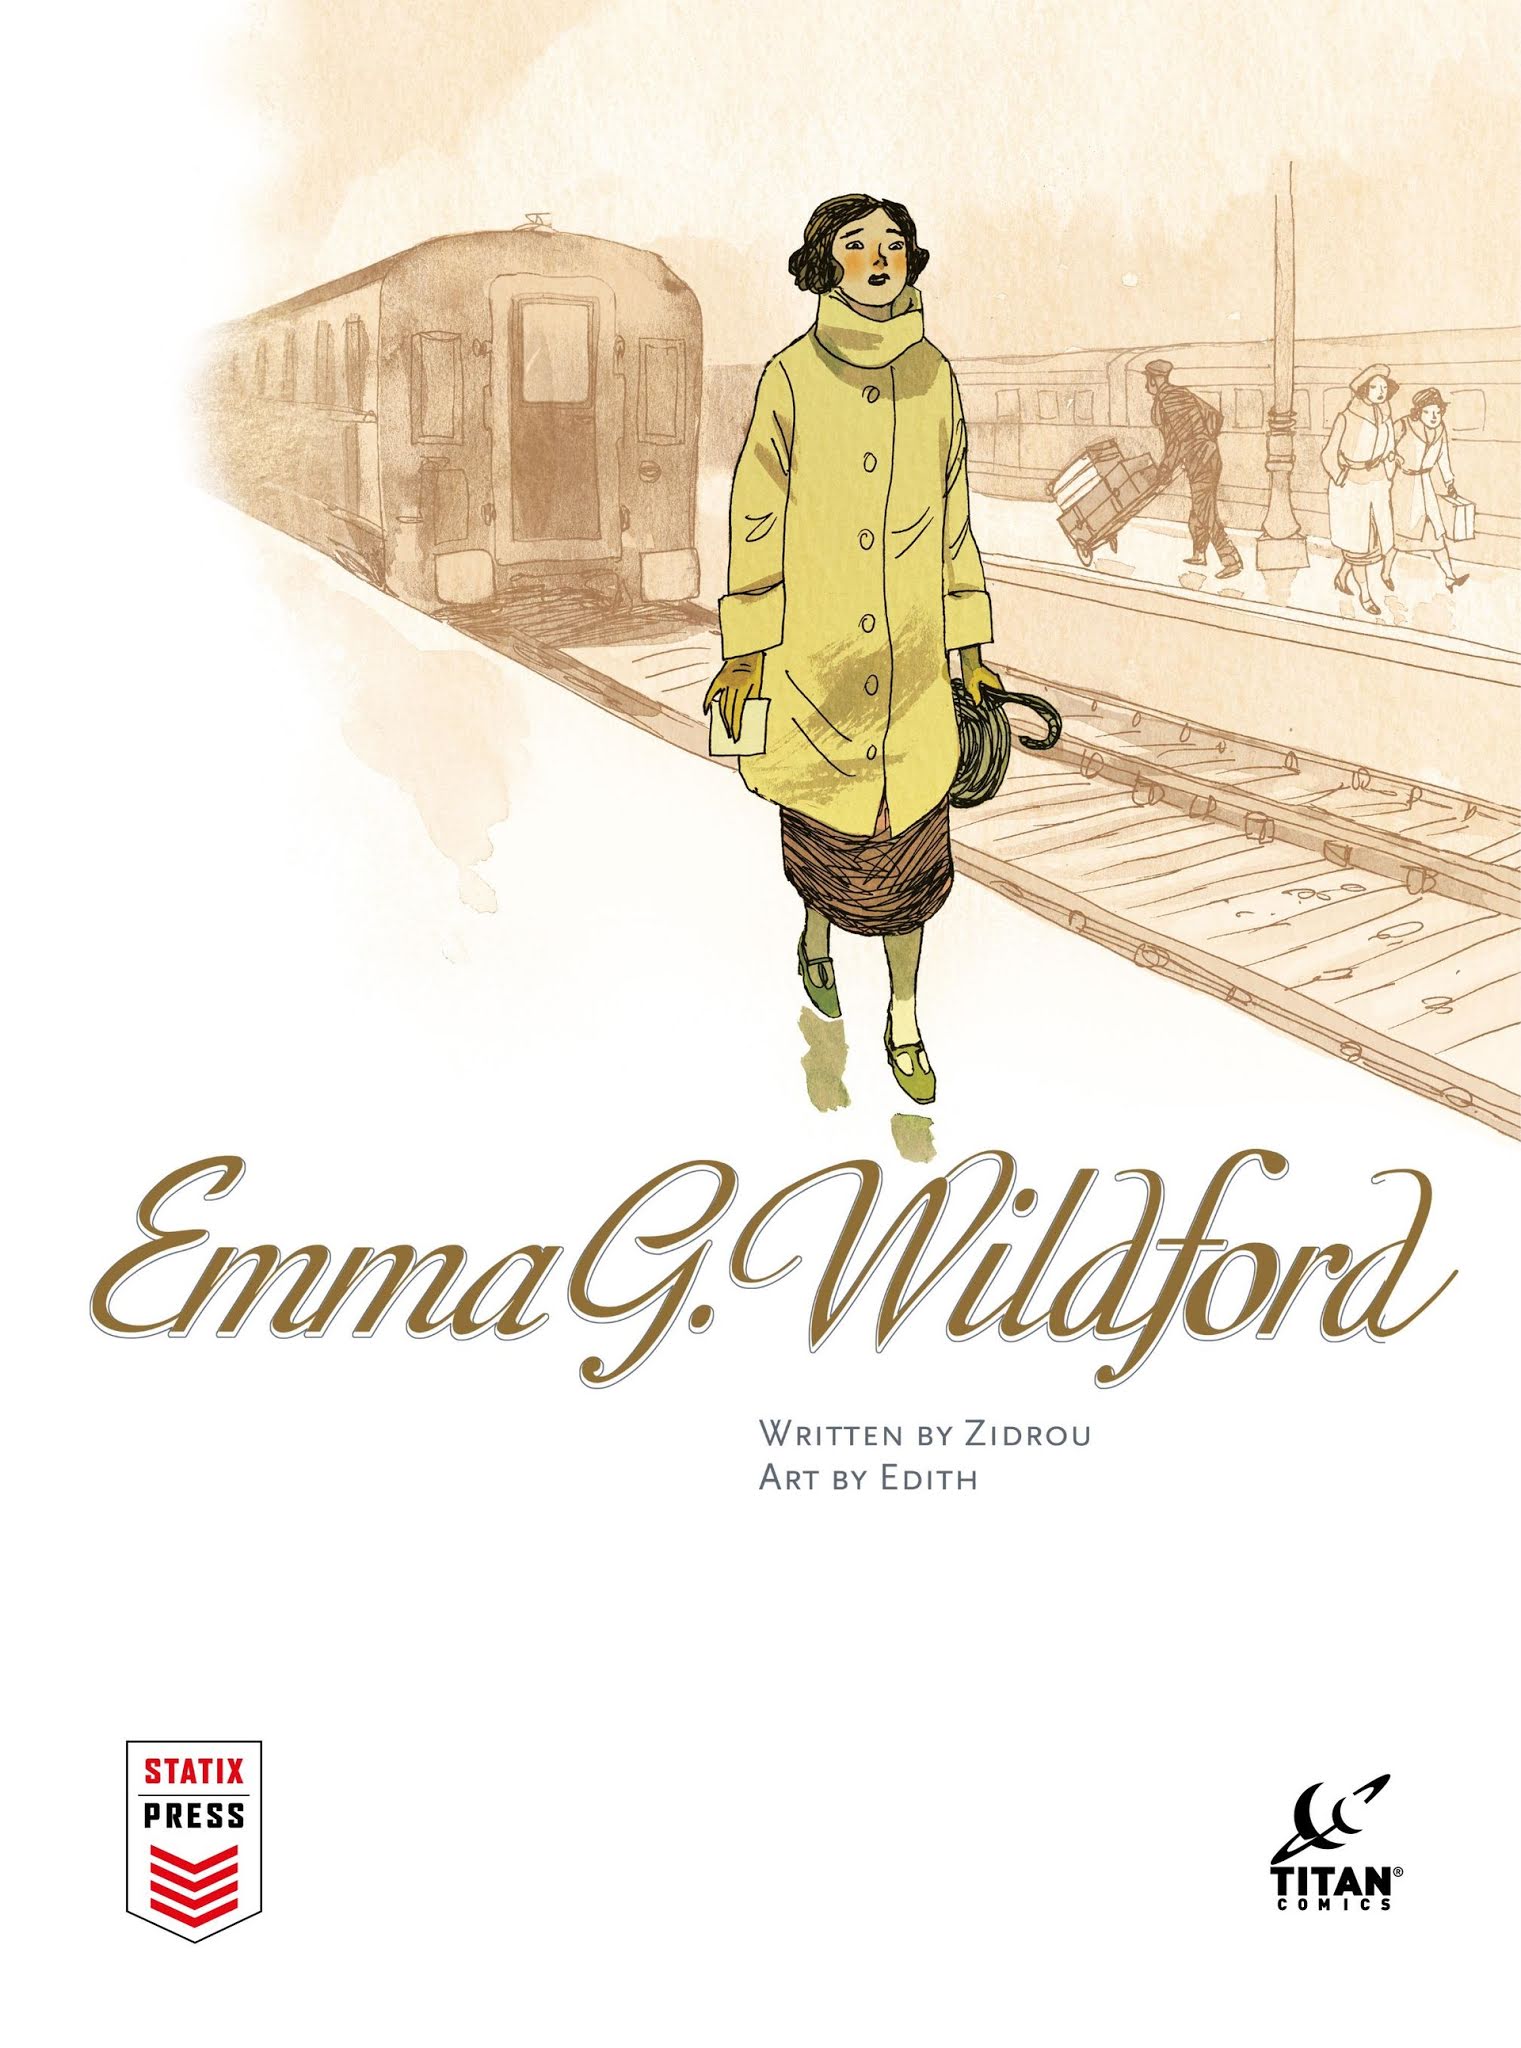 Read online Emma G. Wildford comic -  Issue # TPB - 4